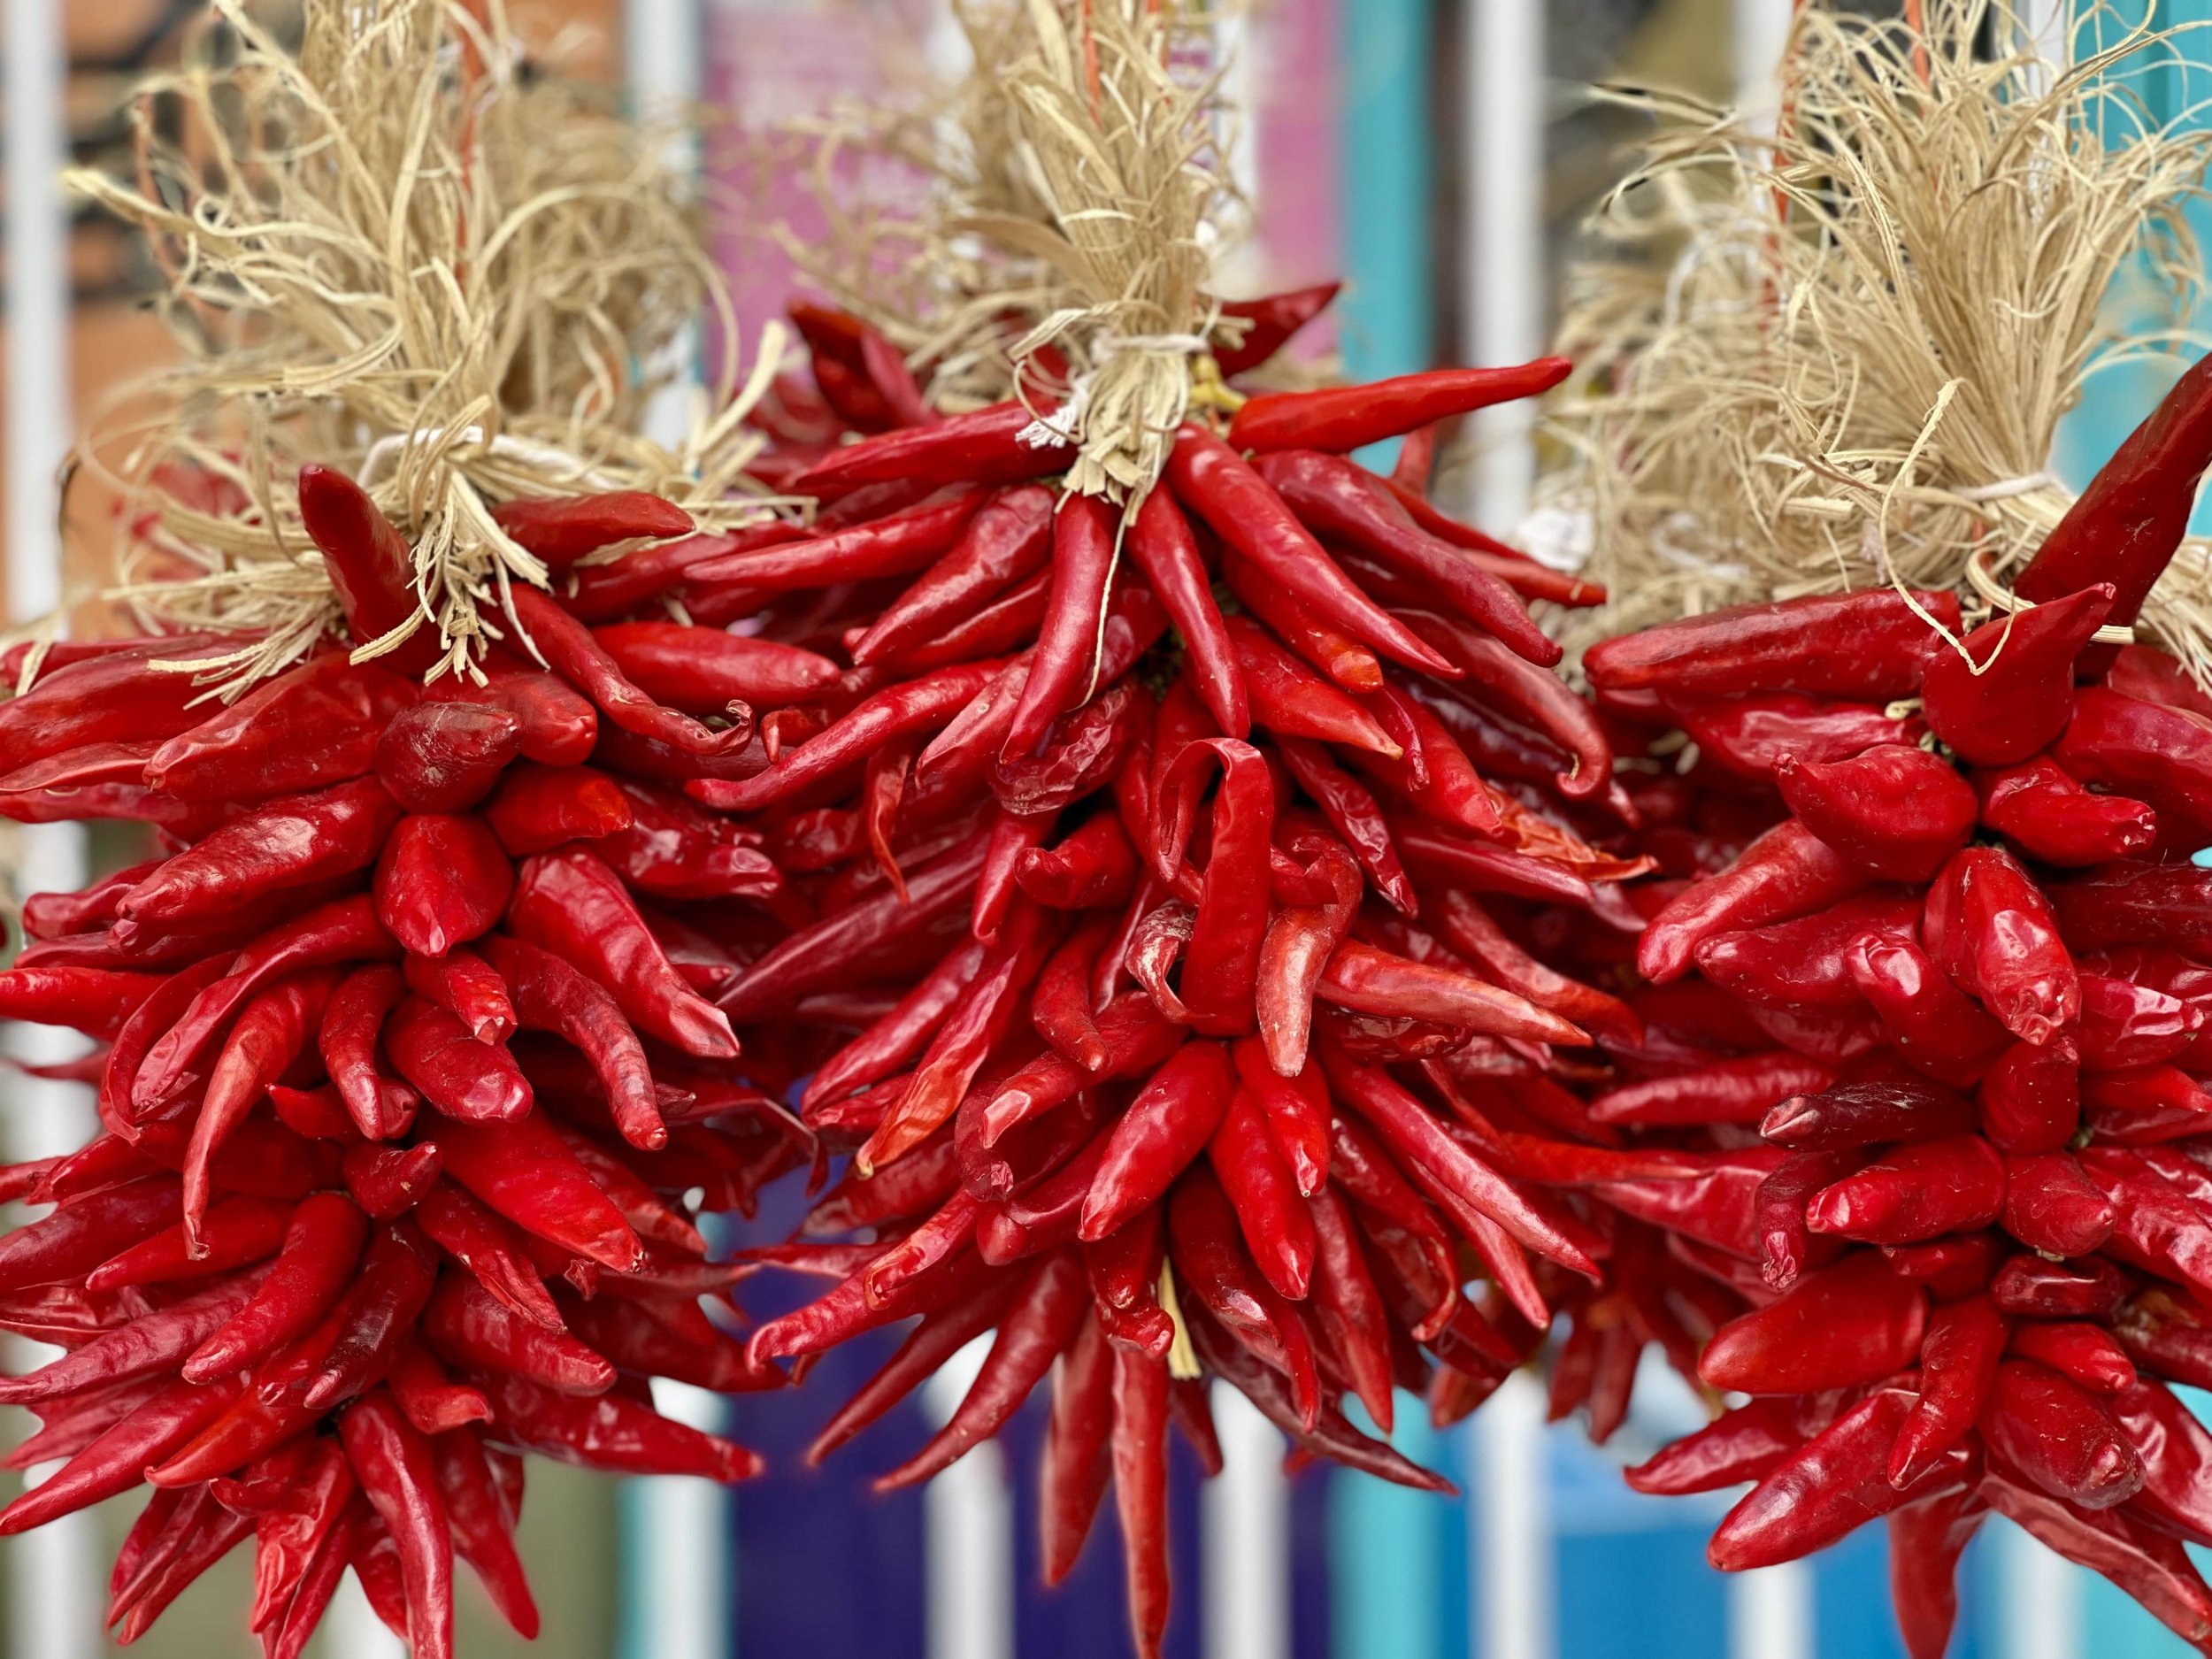 Chile ristras in their dried-red form